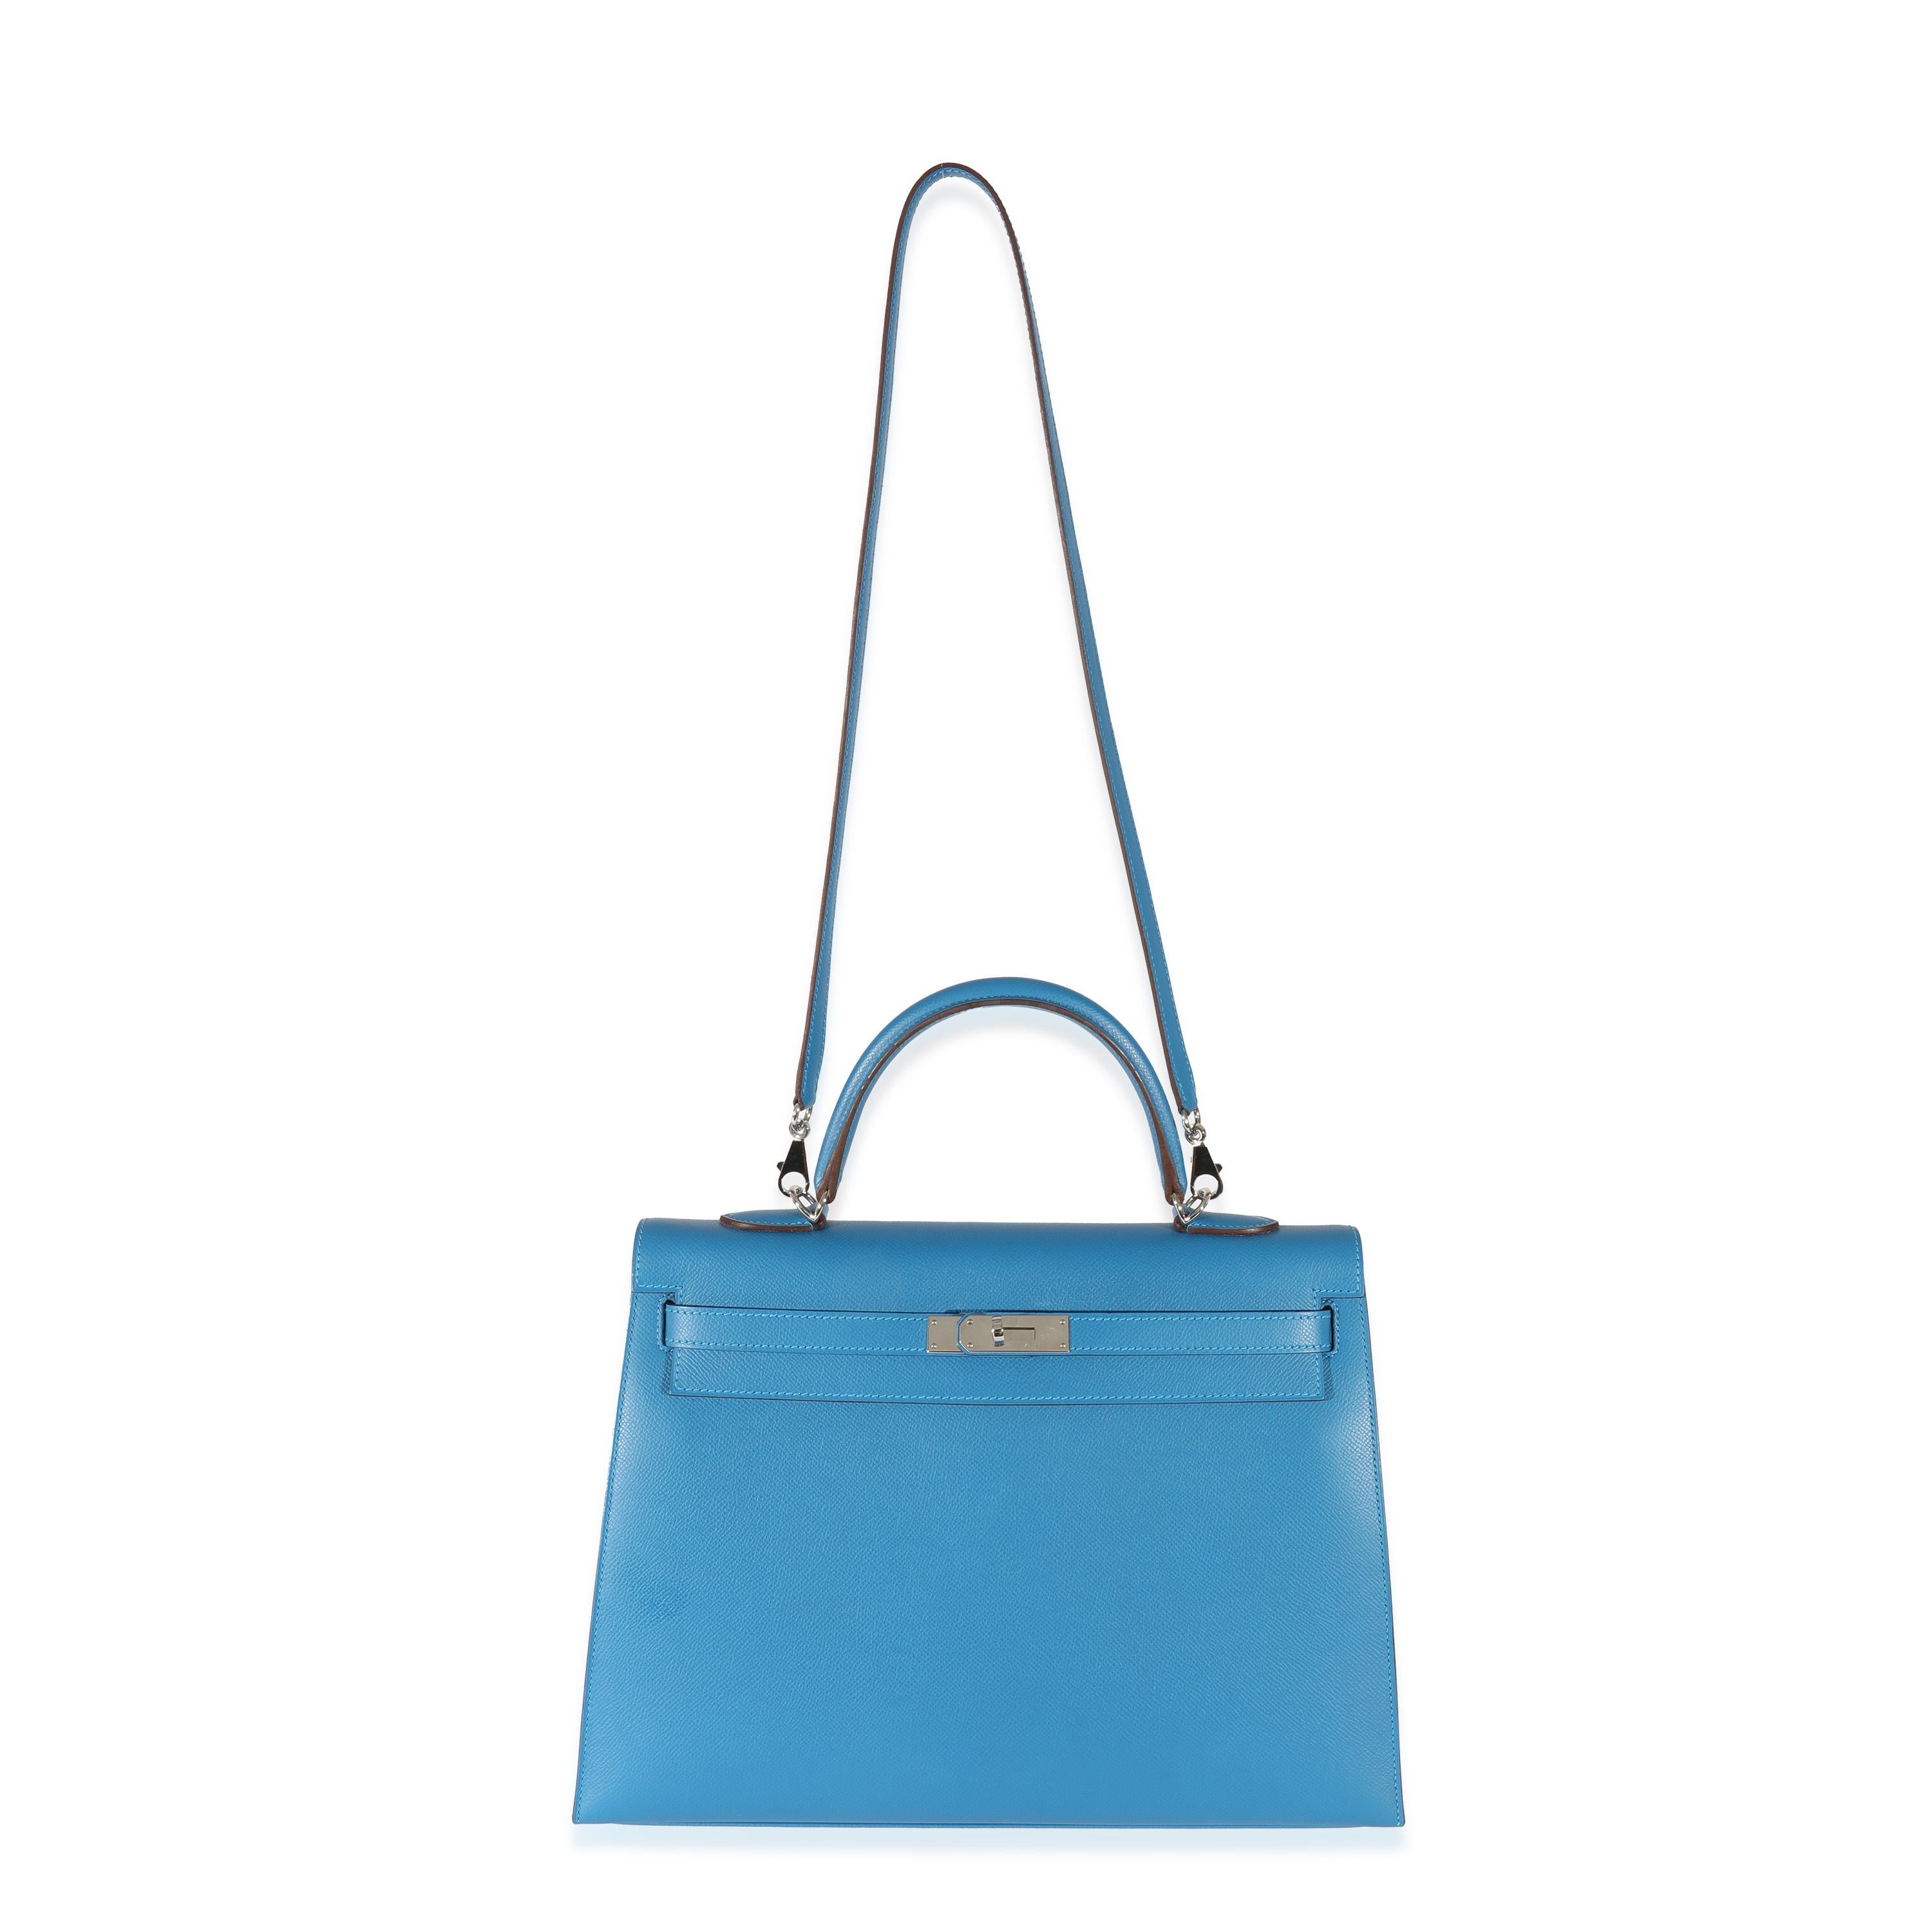 Listing Title: Hermes Epsom Bleu Izmir Sellier Kelly 35 PHW
SKU: 129230
Condition: Pre-owned 
Condition Description: Officially renamed in 1977, the Kelly tote bag from Hermès was originally called the Sac à Dépêches (which translates as ‘the